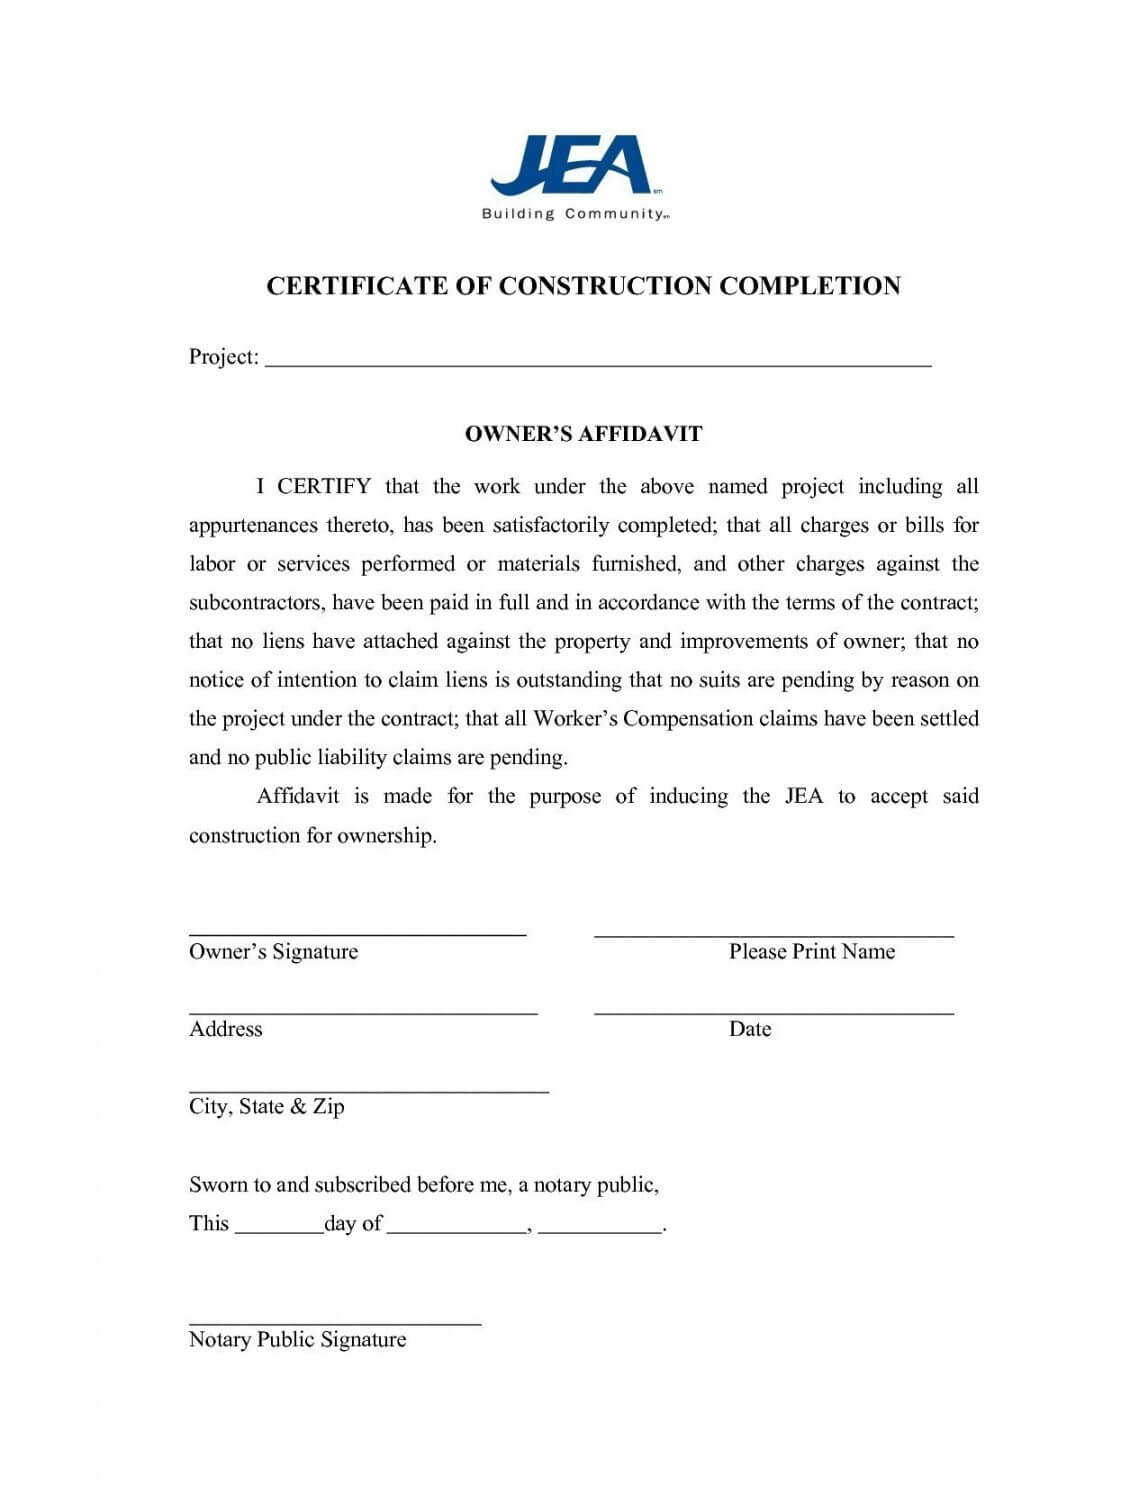 Free Project Completion Certificate Rmat In Word Template Throughout Certificate Of Completion Construction Templates